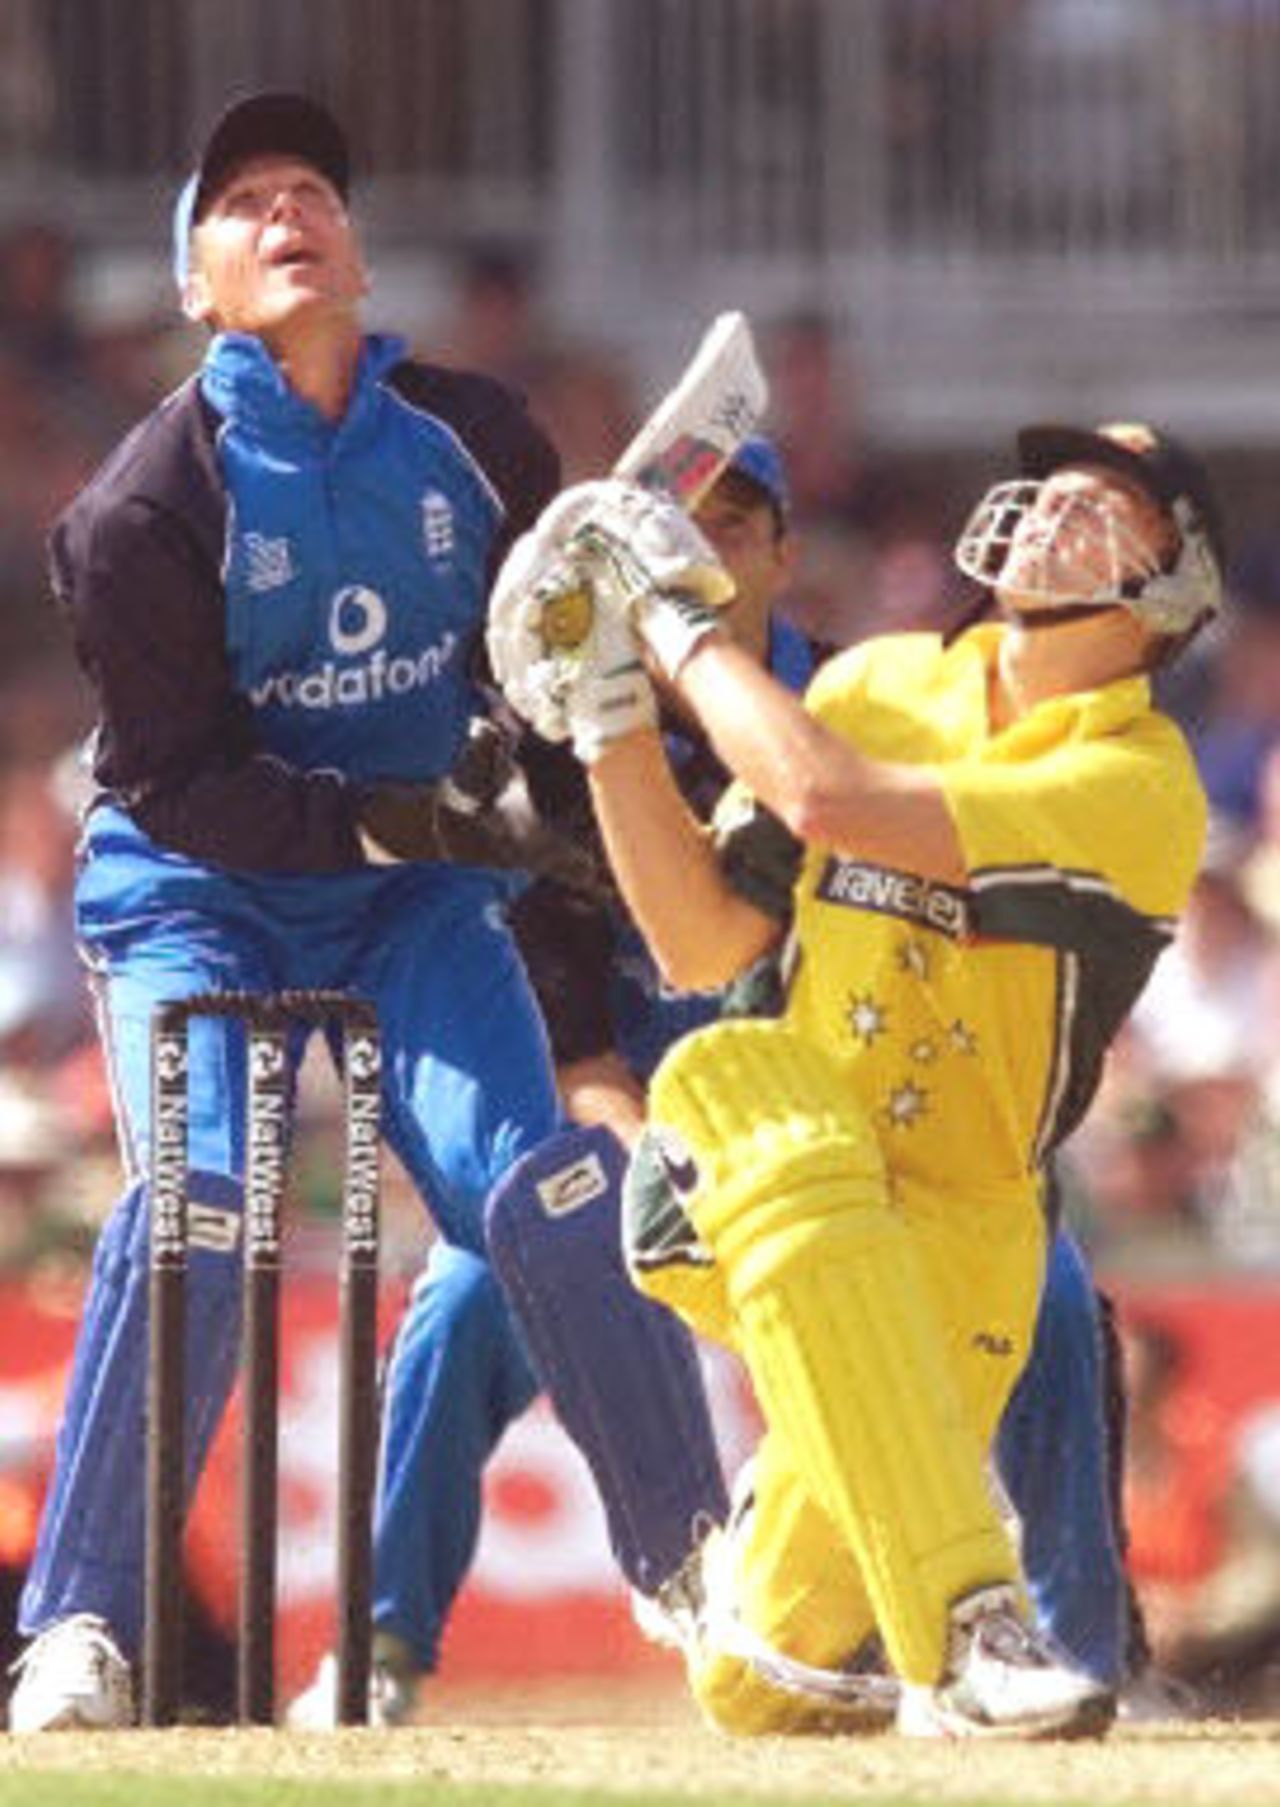 Adam Gilchrist lofts the ball as Alec Stewart looks on, 9th ODI at the Oval, 21 June 2001.